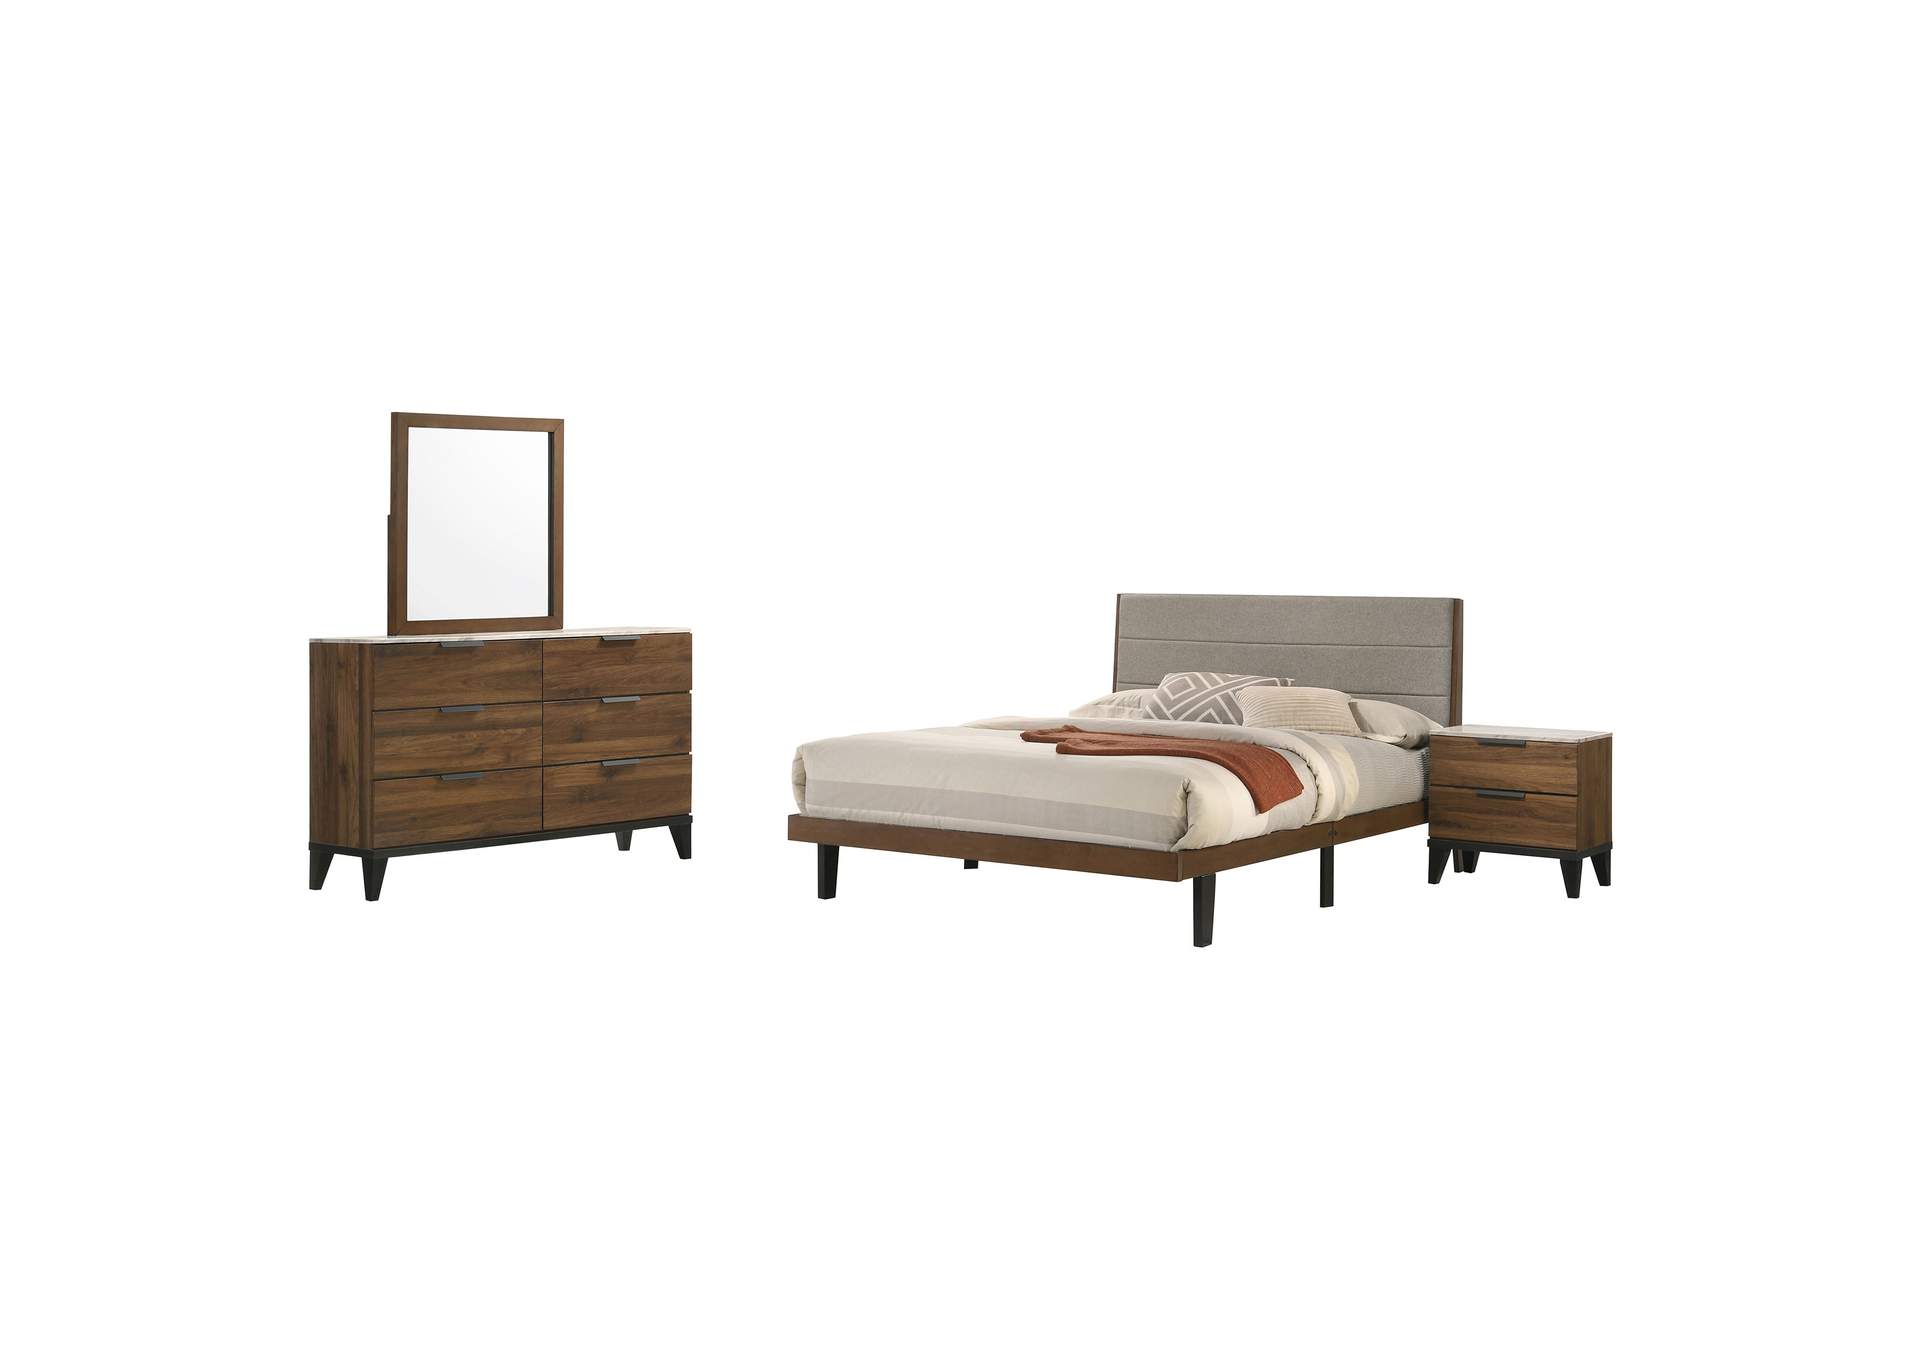 Mays 4-piece Upholstered Eastern King Bedroom Set Walnut Brown and Grey,Coaster Furniture